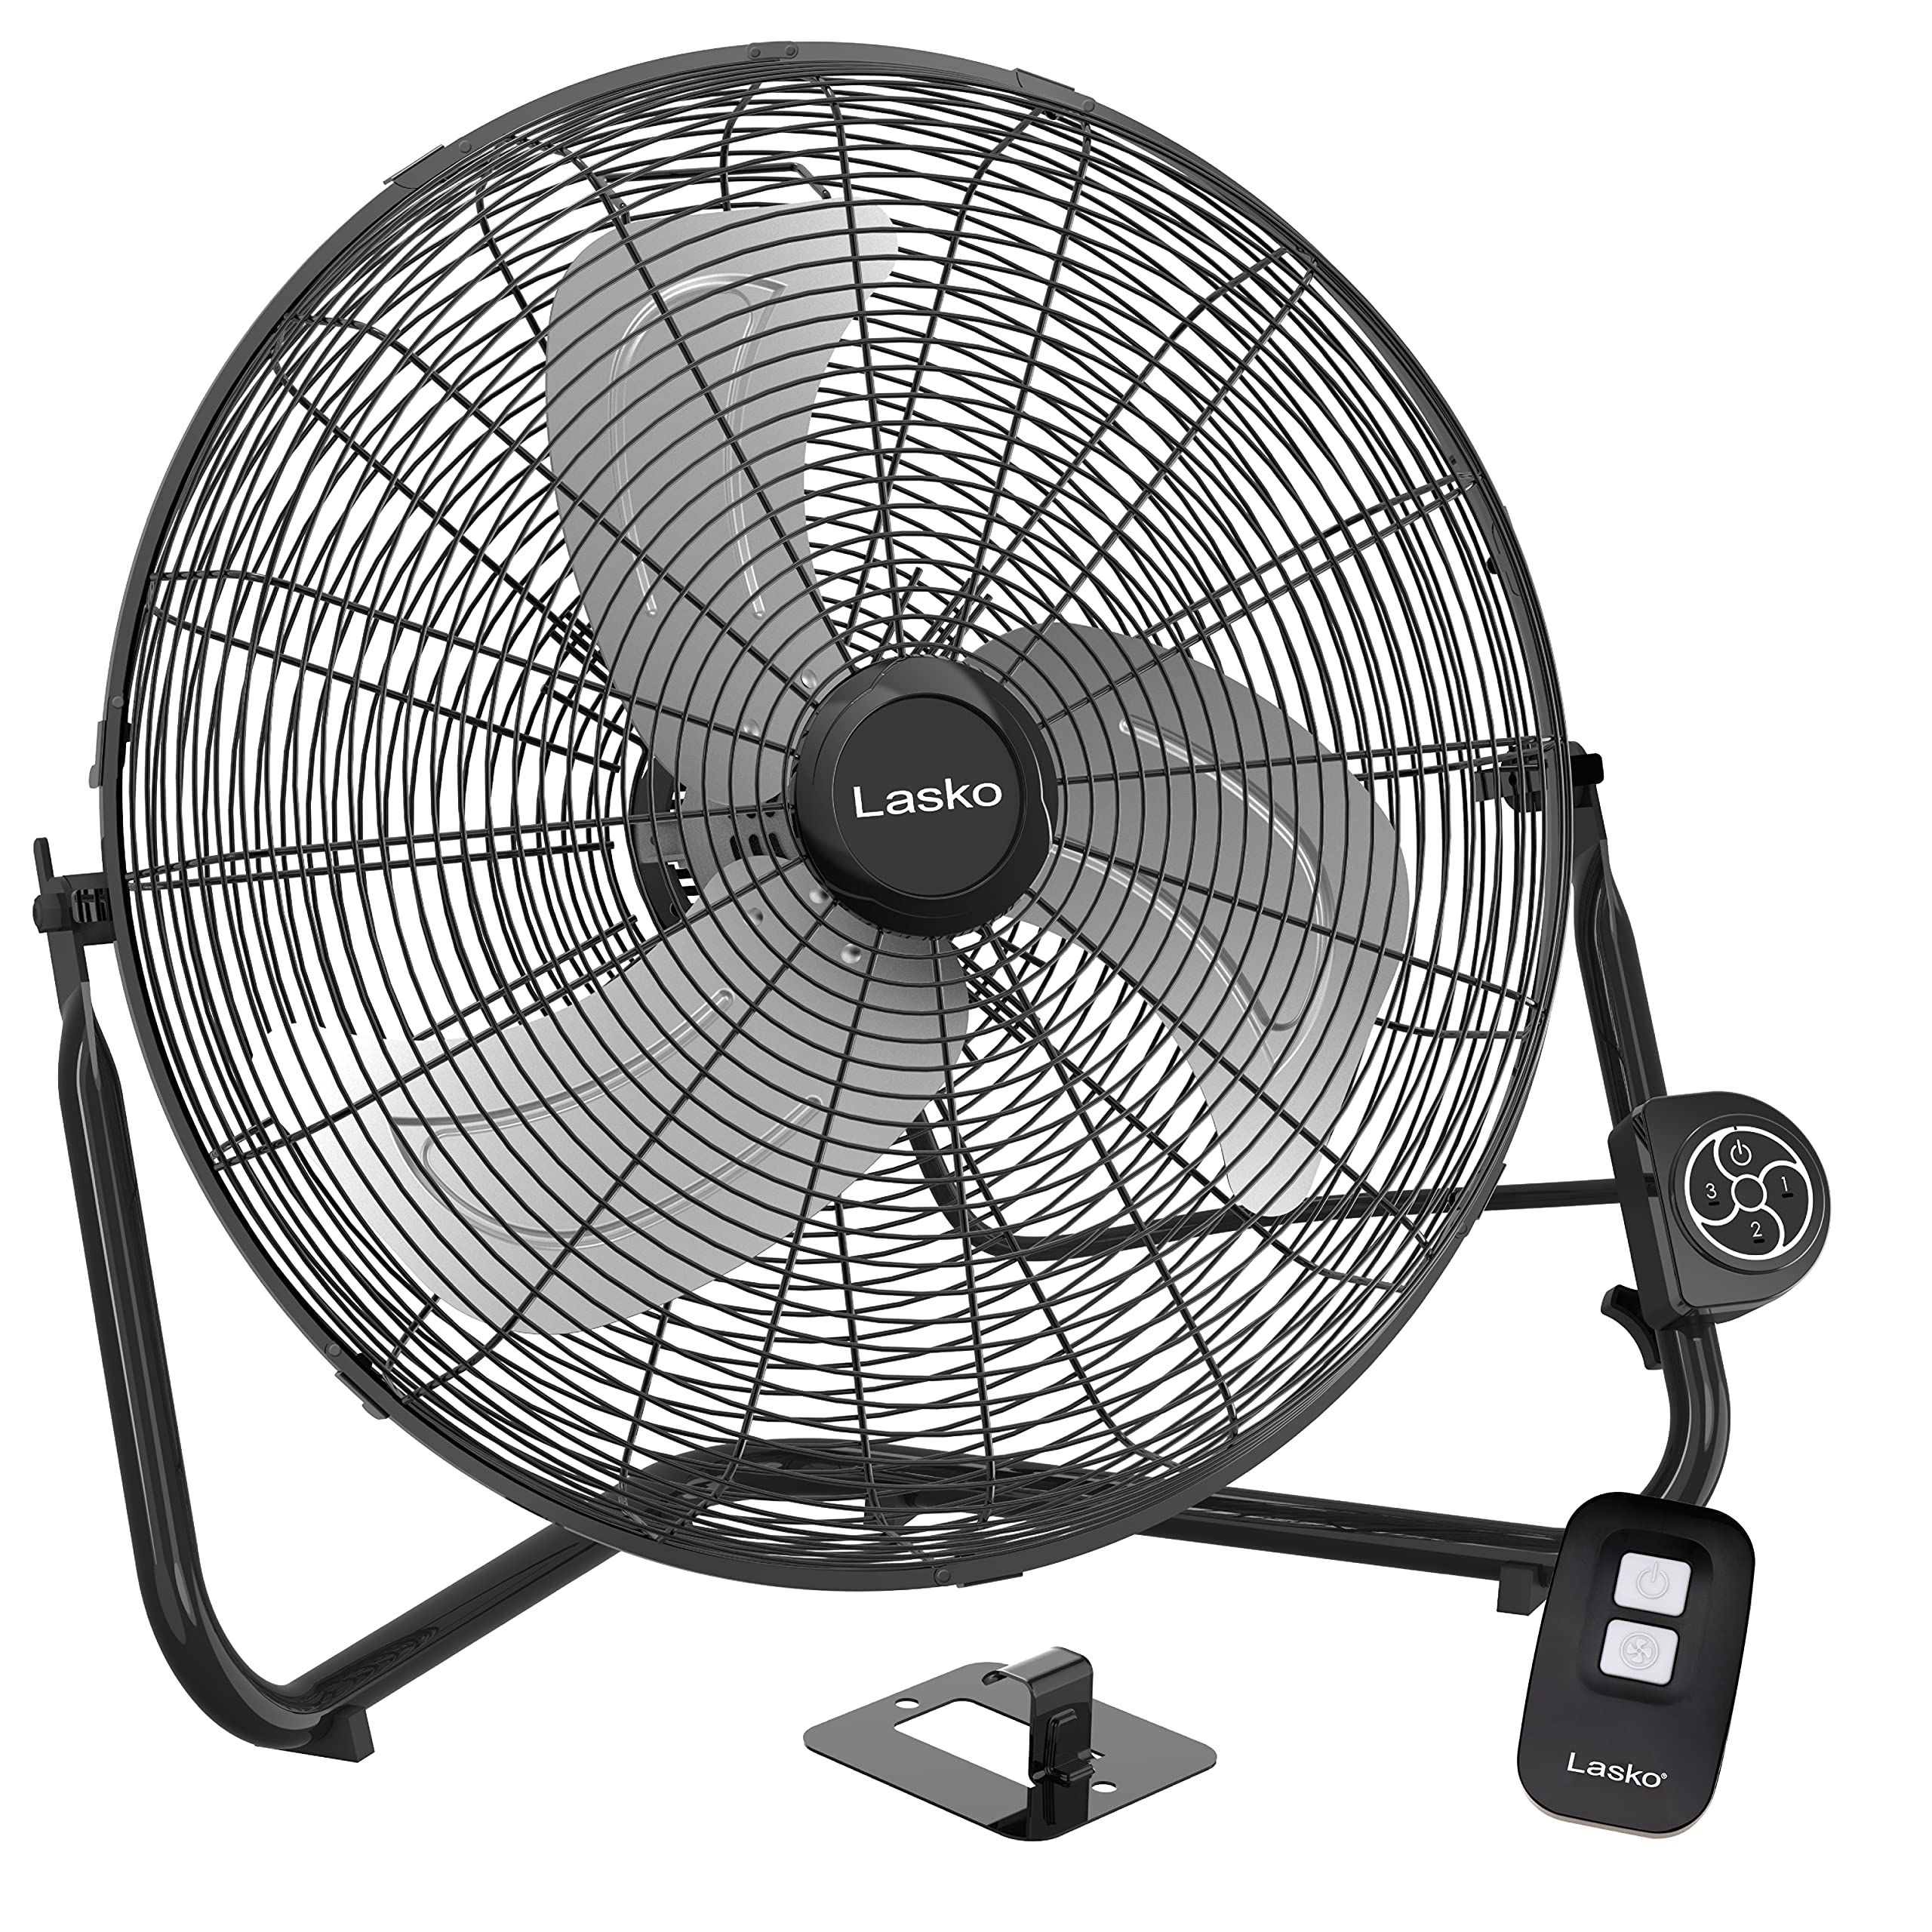 Lasko High Velocity Fan with QuickMount for Floor or Wall Mount Use, 3 Powerful Speeds, Remote Control for Garage, Shop, Attic, 20